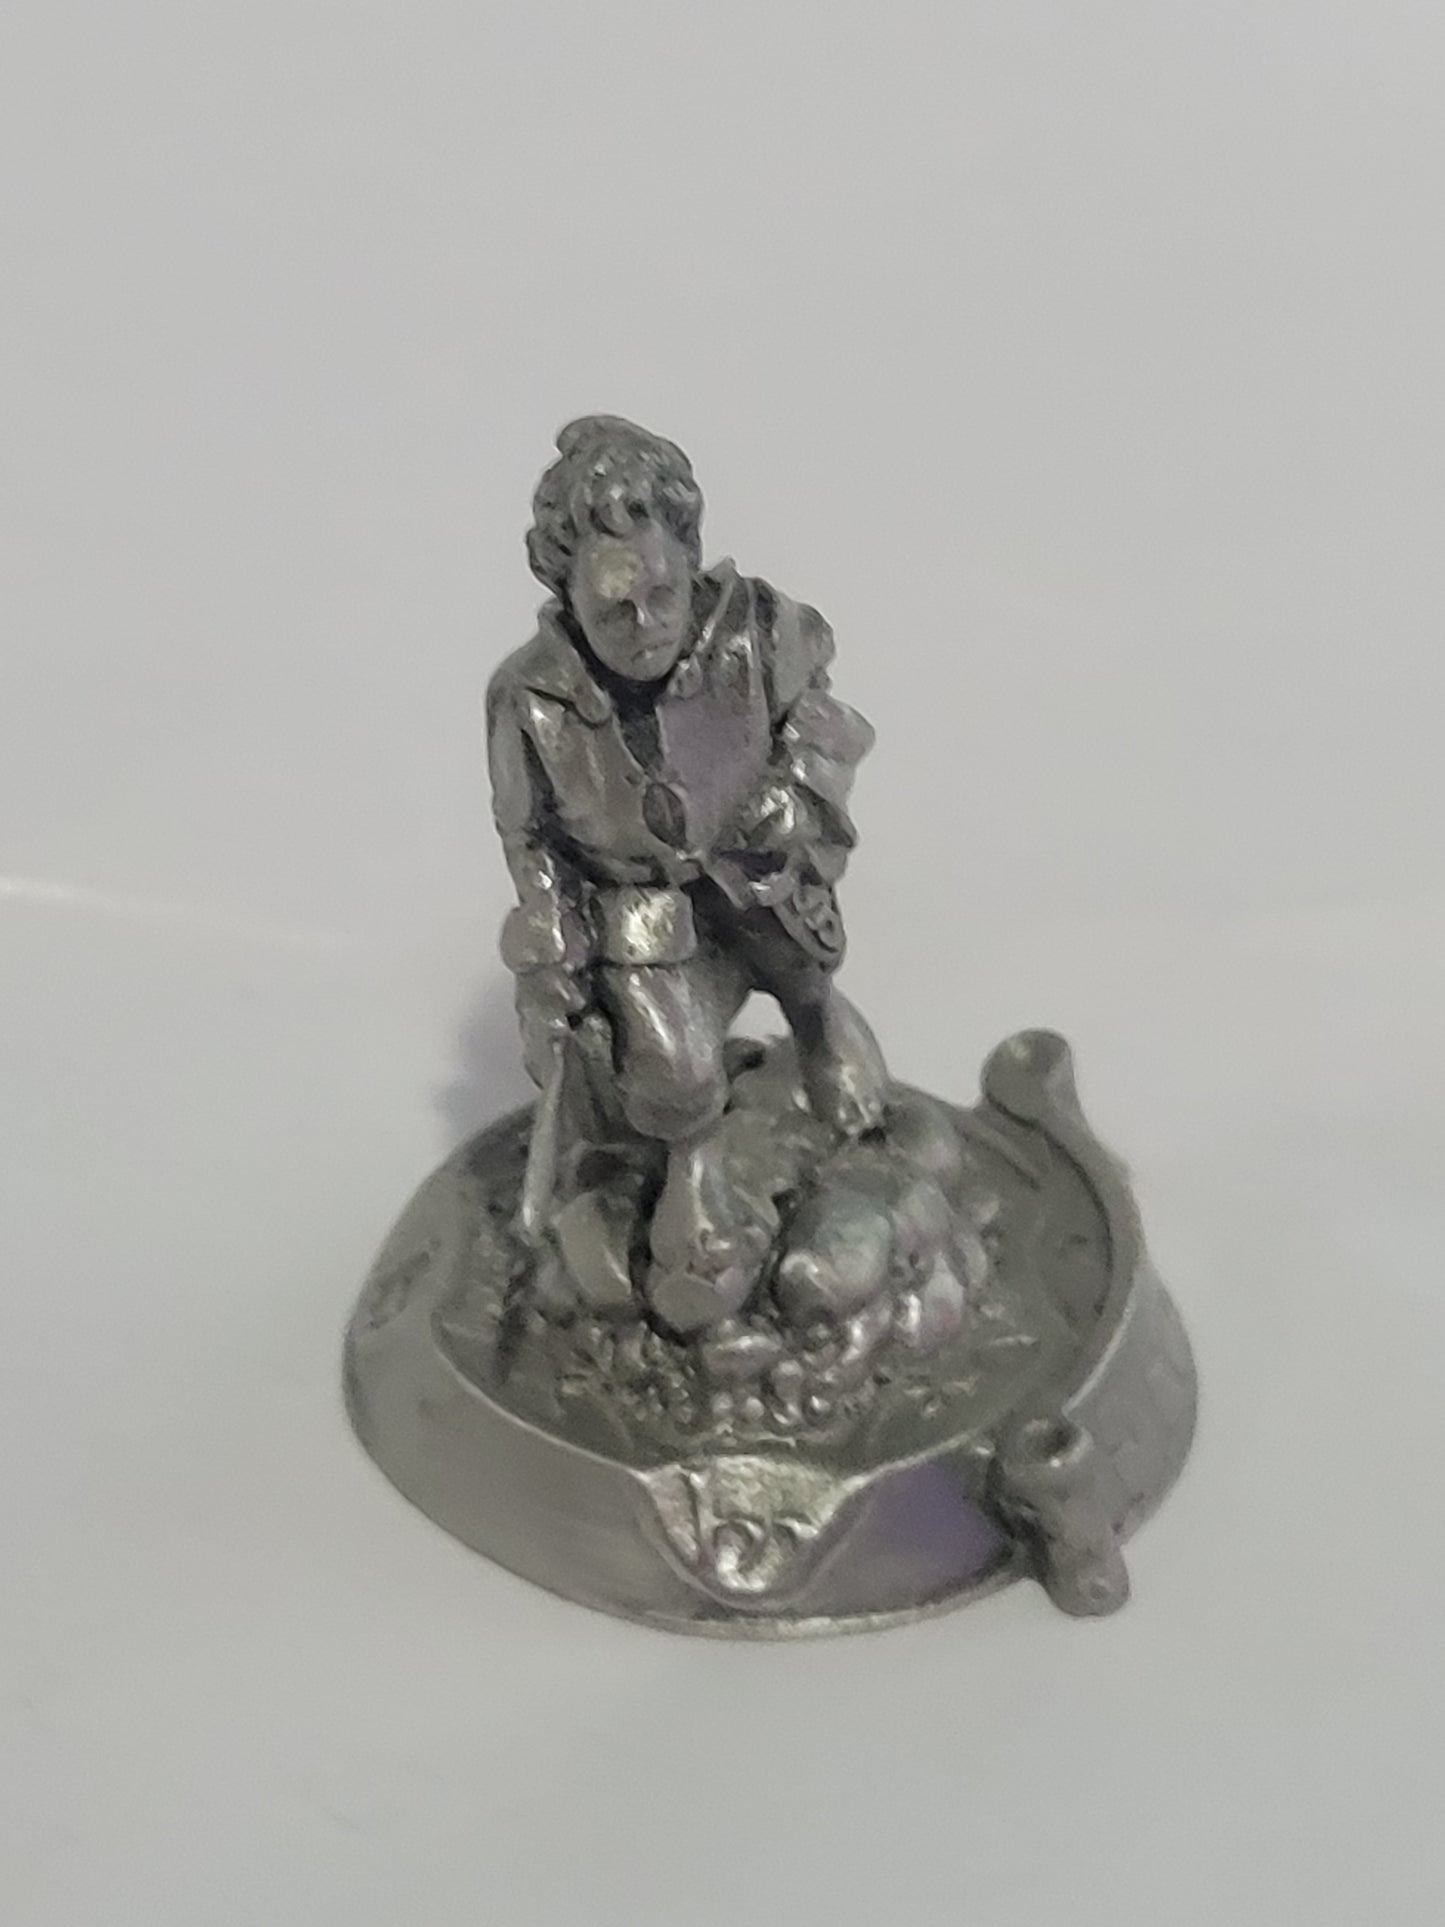 Frodo from the Lord of the Rings by Rawcliffe, Pewter Figurine